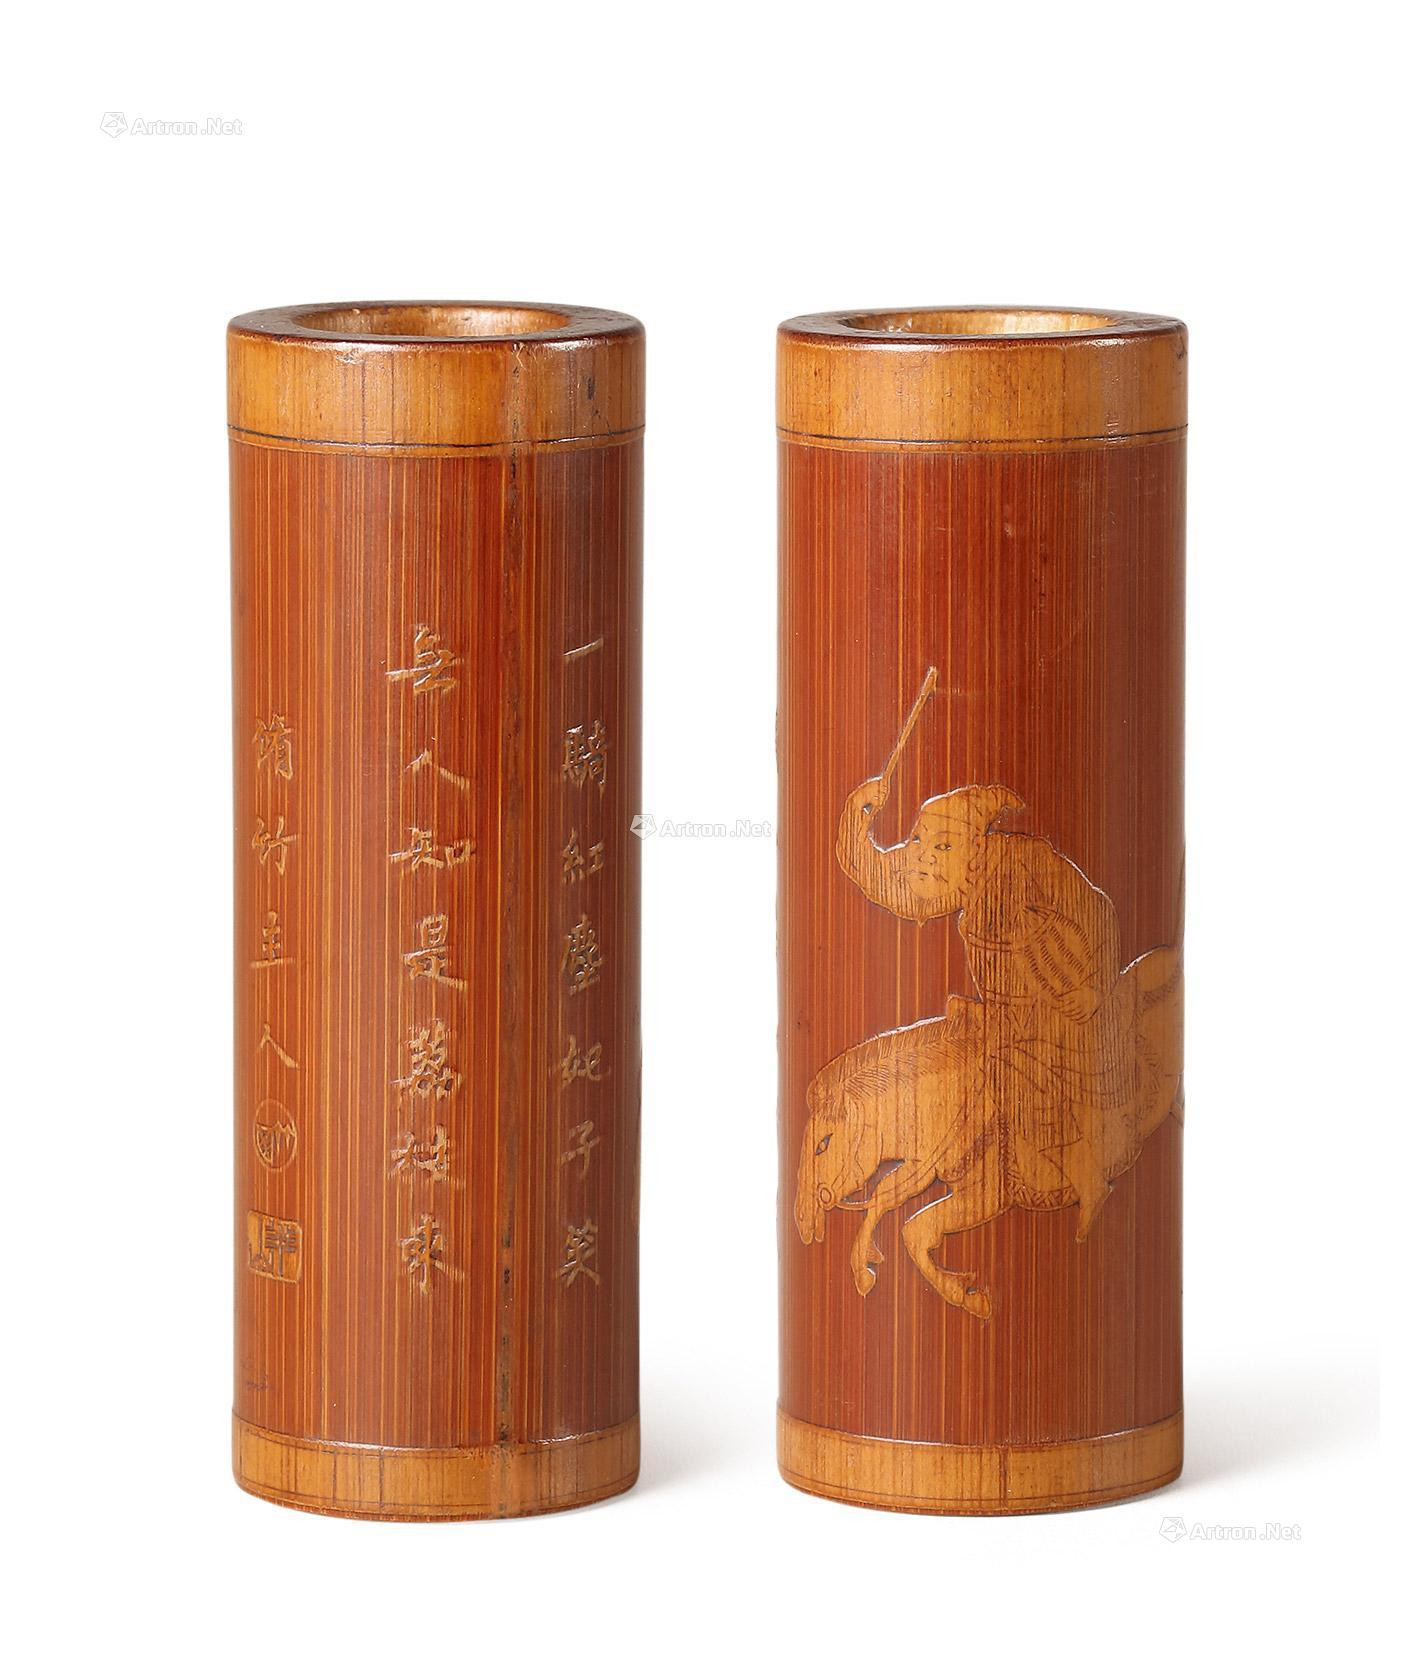 A BAMBOO SKIN RESERVED ‘HORSE’ INCENSE HOLDER